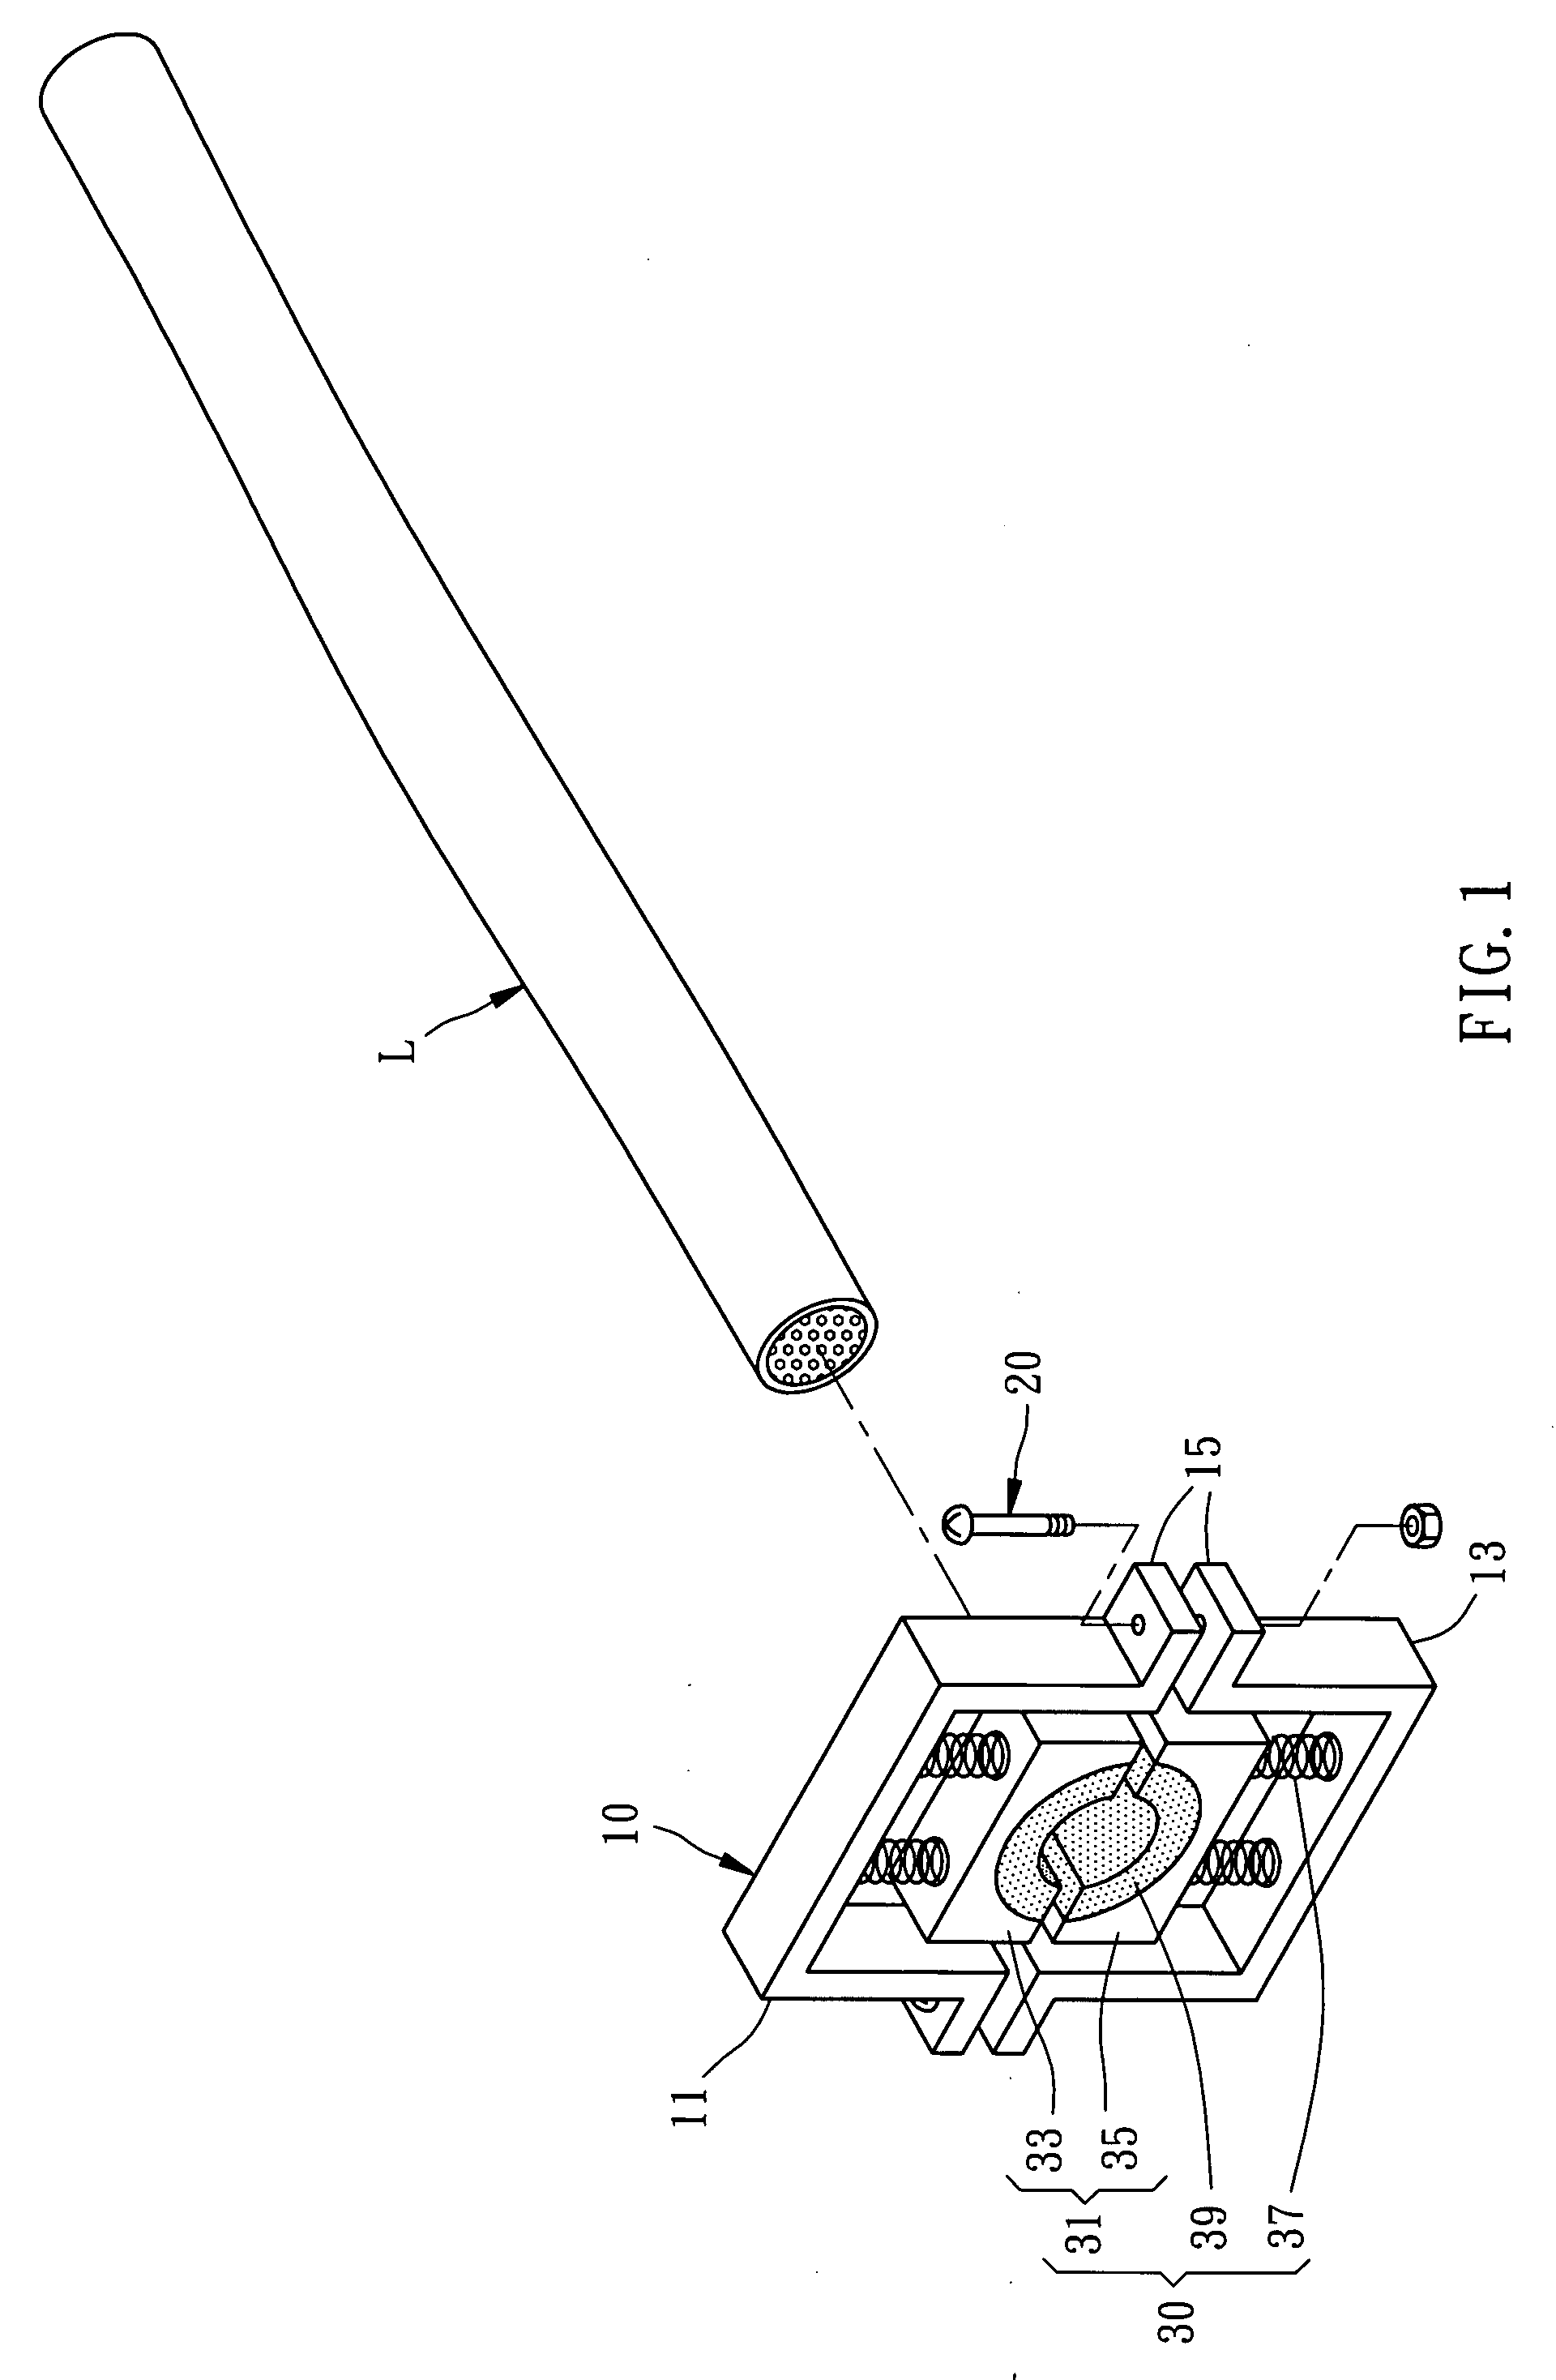 Resonance-coordinating device for audio and video